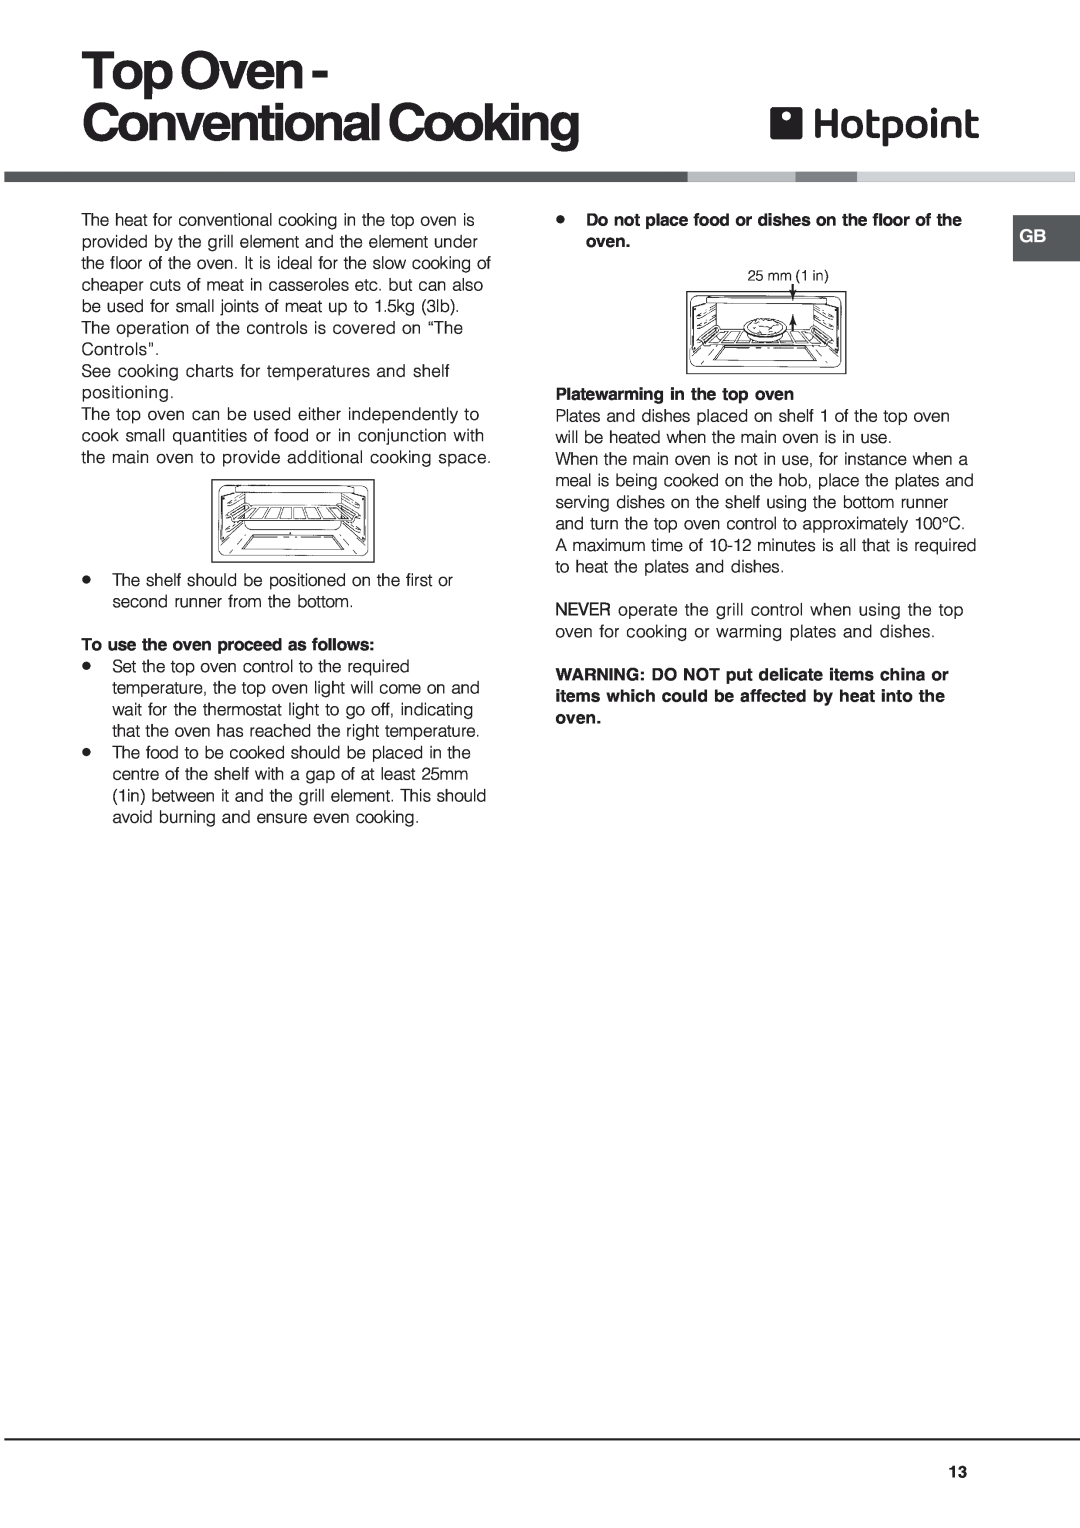 Hotpoint UQ89I manual TopOven- ConventionalCooking, To use the oven proceed as follows, Platewarming in the top oven 